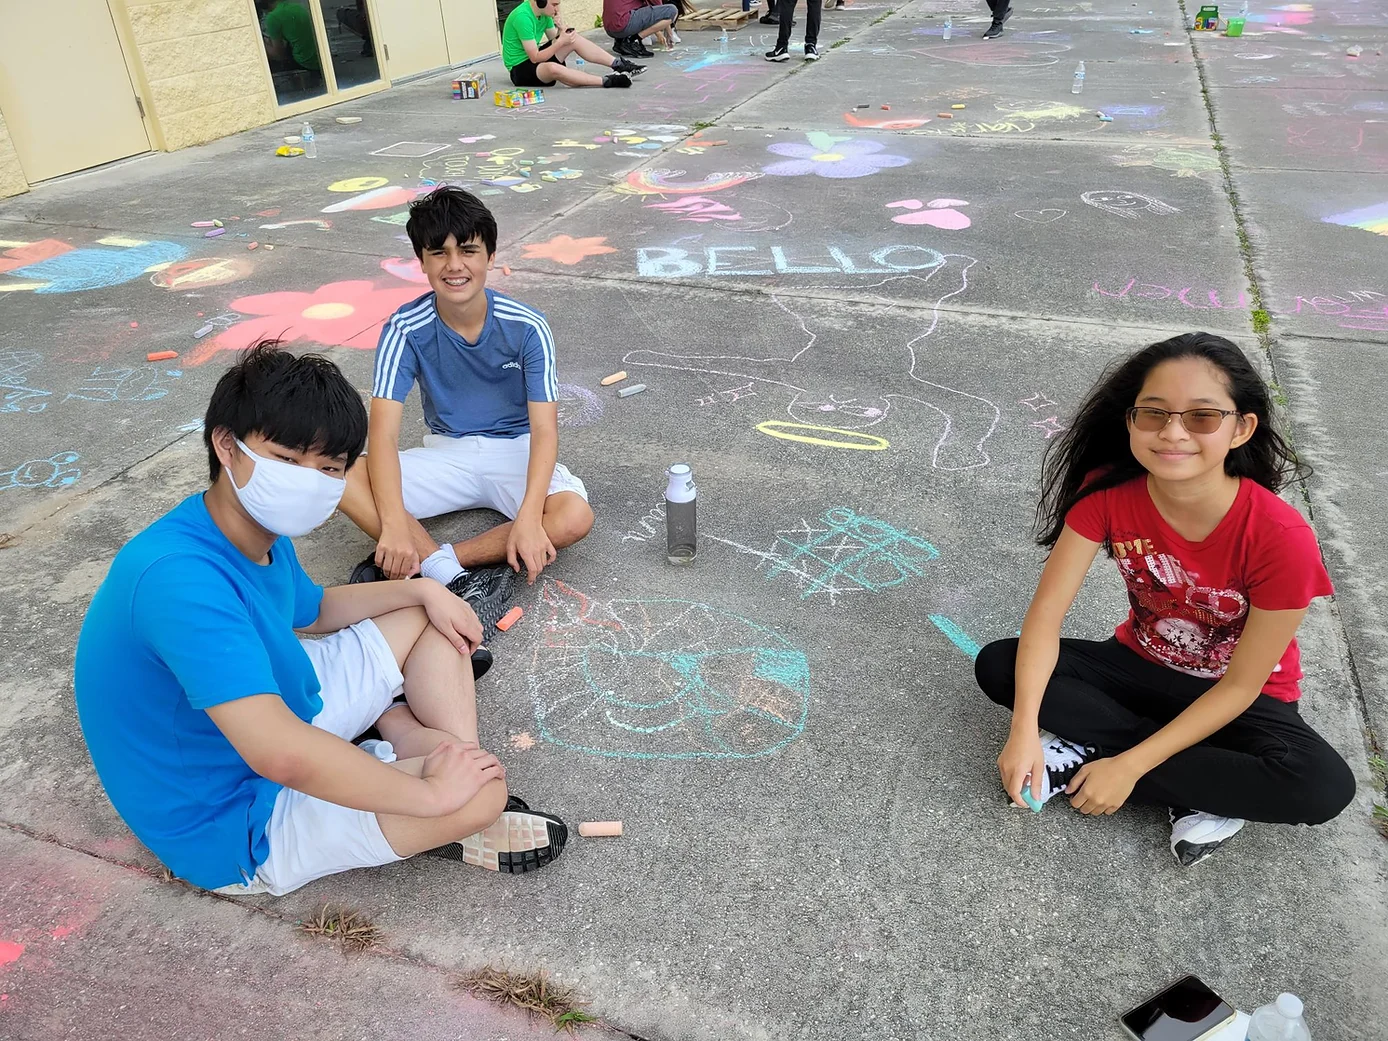 Group of kids drawing with chalk on the floor